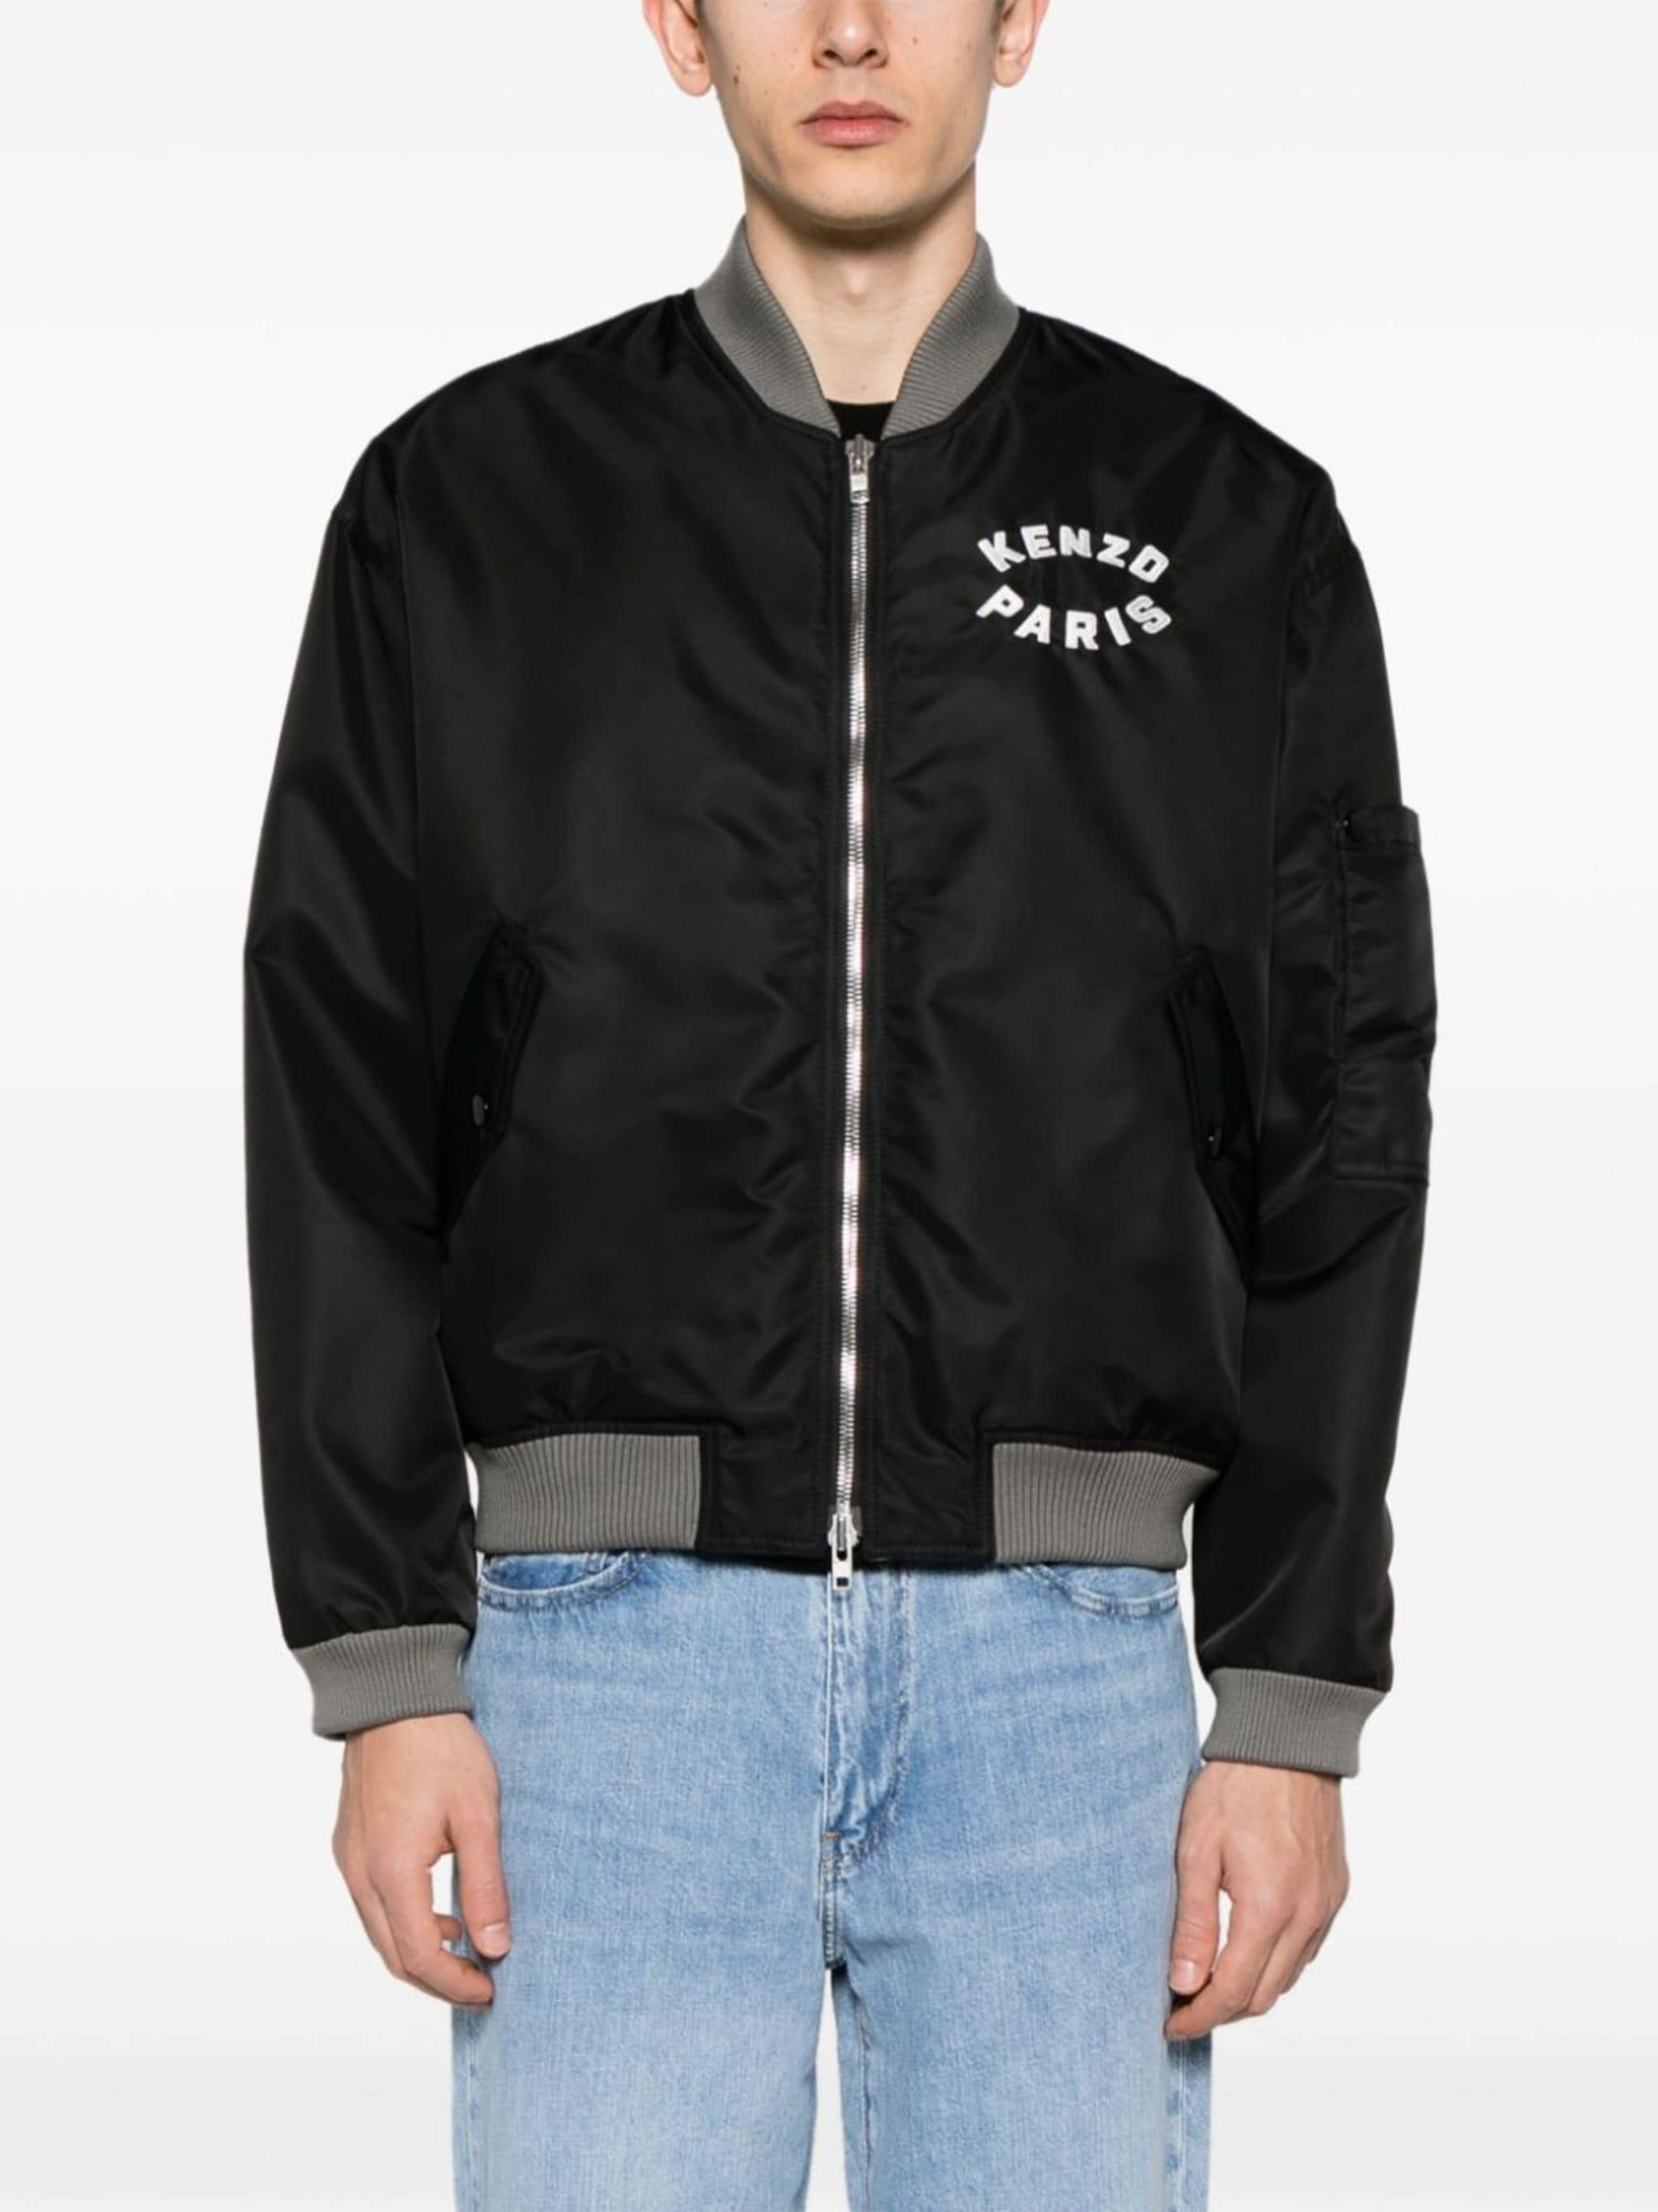 Lucky Tiger embroidered bomber jacket - 4